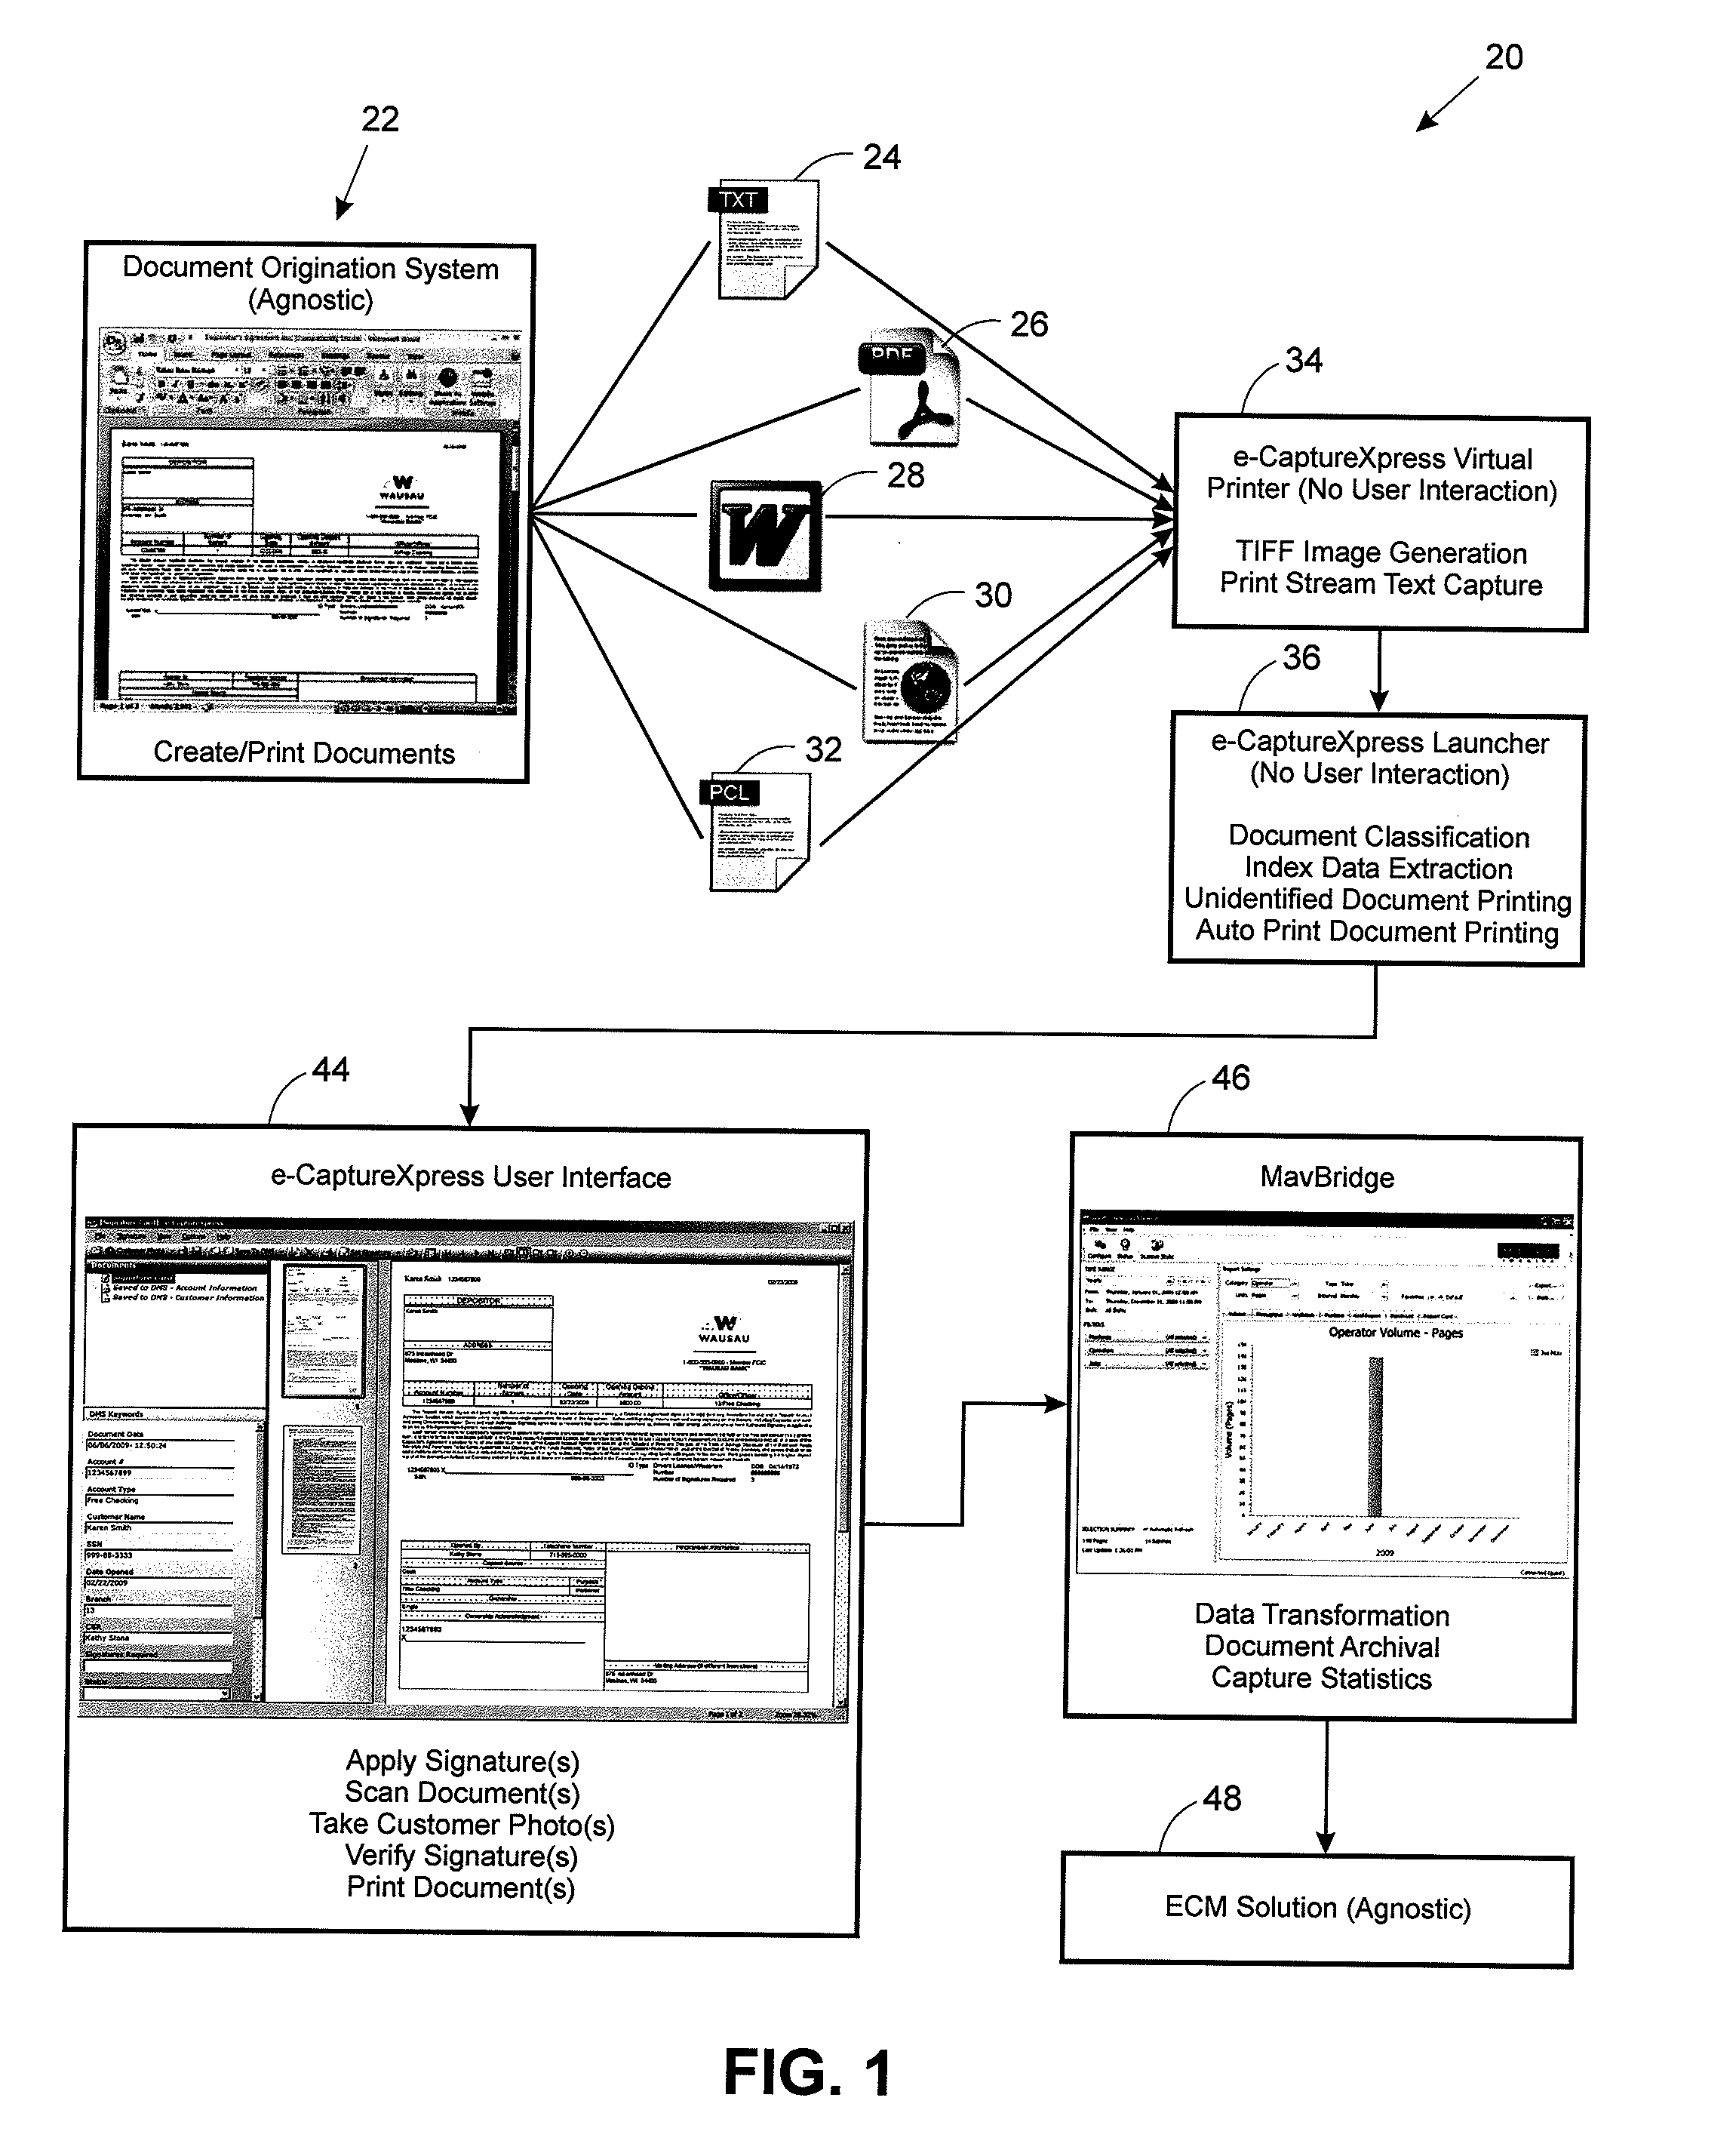 Distributed capture system for use with a legacy enterprise content management system